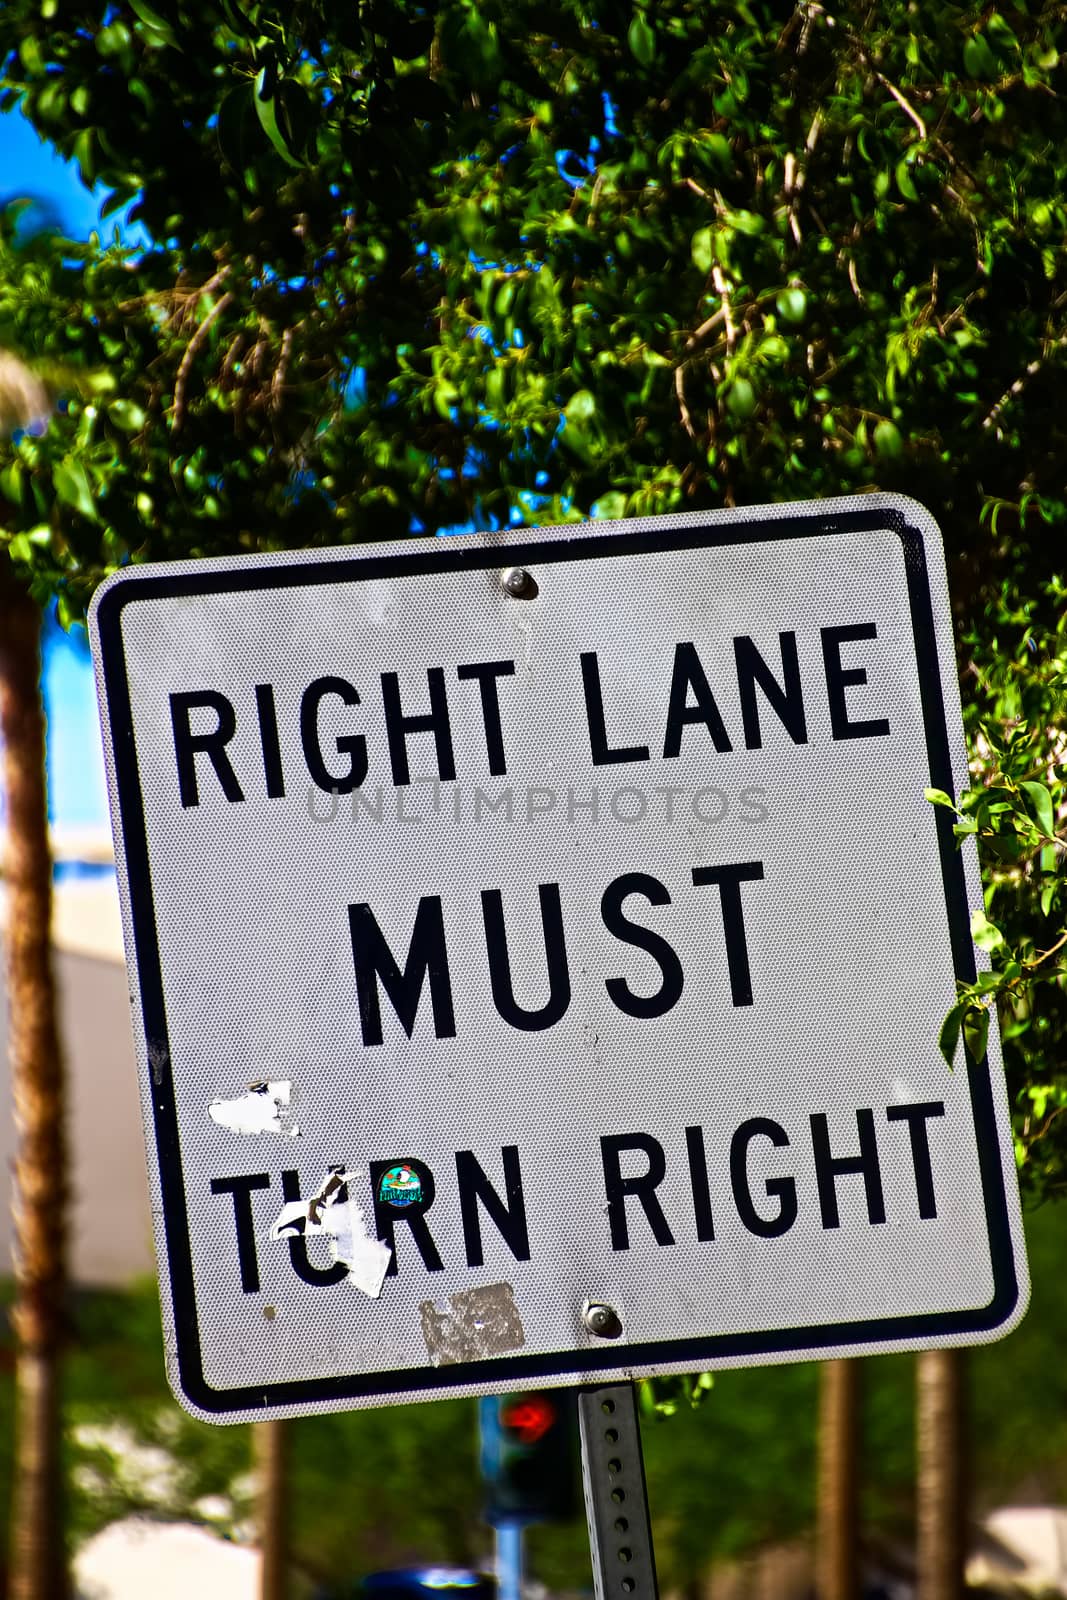 Sign of Right lane must turn right.Close up on a "Right Lane Must Turn Right" at an intersection, in a transportation background.Signpost in public street, "Right Lane Must Turn Right" by USA-TARO